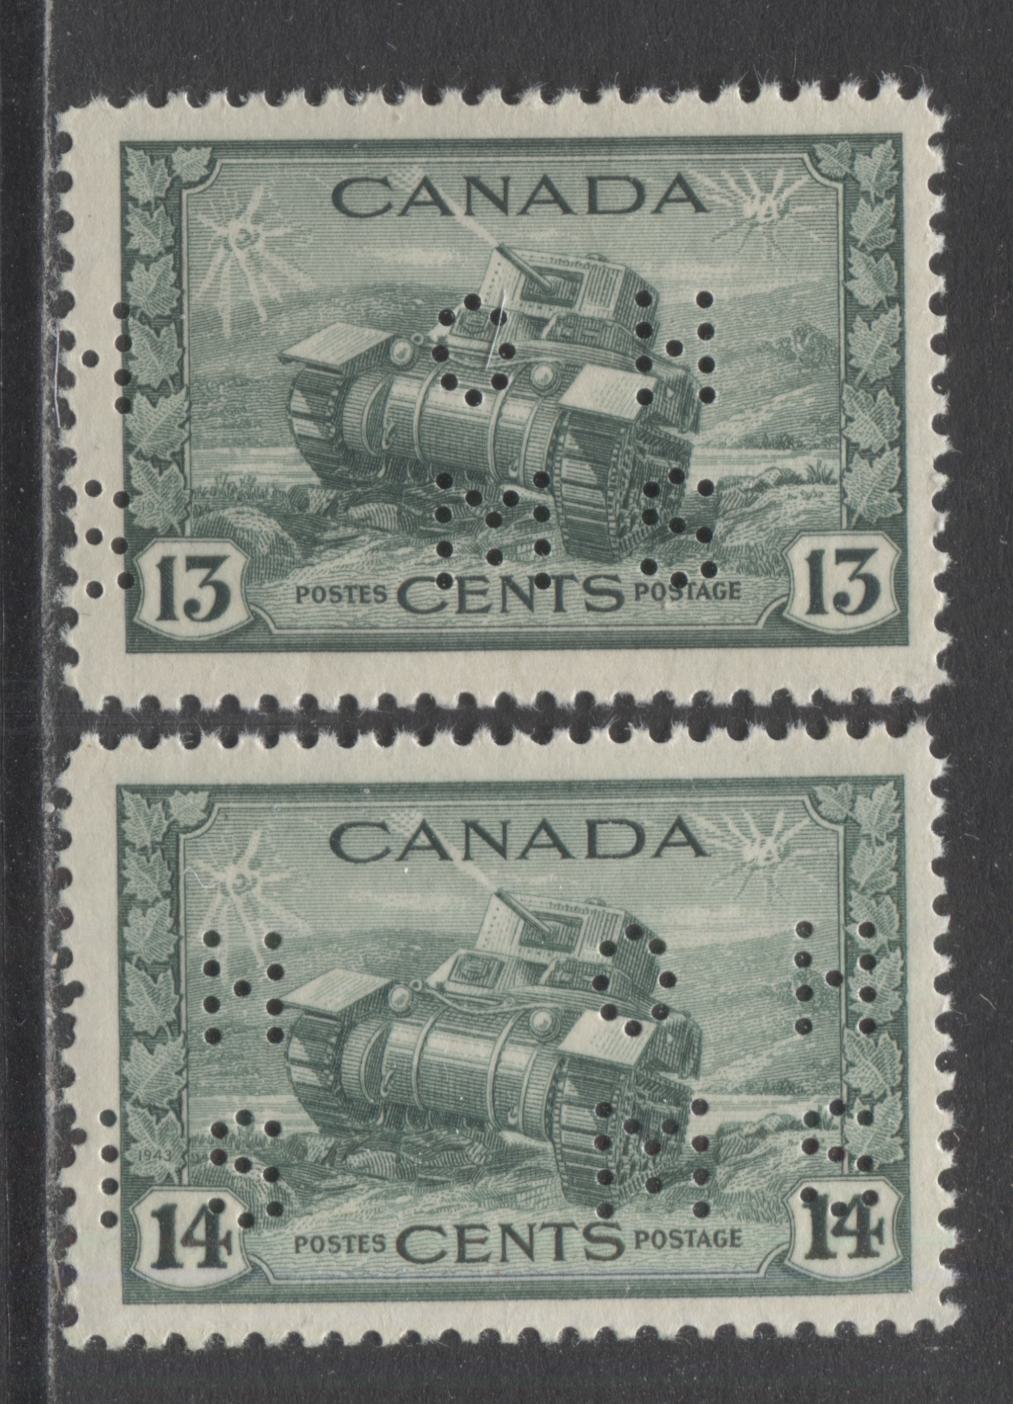 Lot 276 Canada #O9-258, O9-259 13c & 14c Dull Green Ram Tank, 1942-1943 4 Hole OHMS Perfin War Issue, 2 Fine NH Singles On Vertical Wove Paper With Cream Gum, Position A